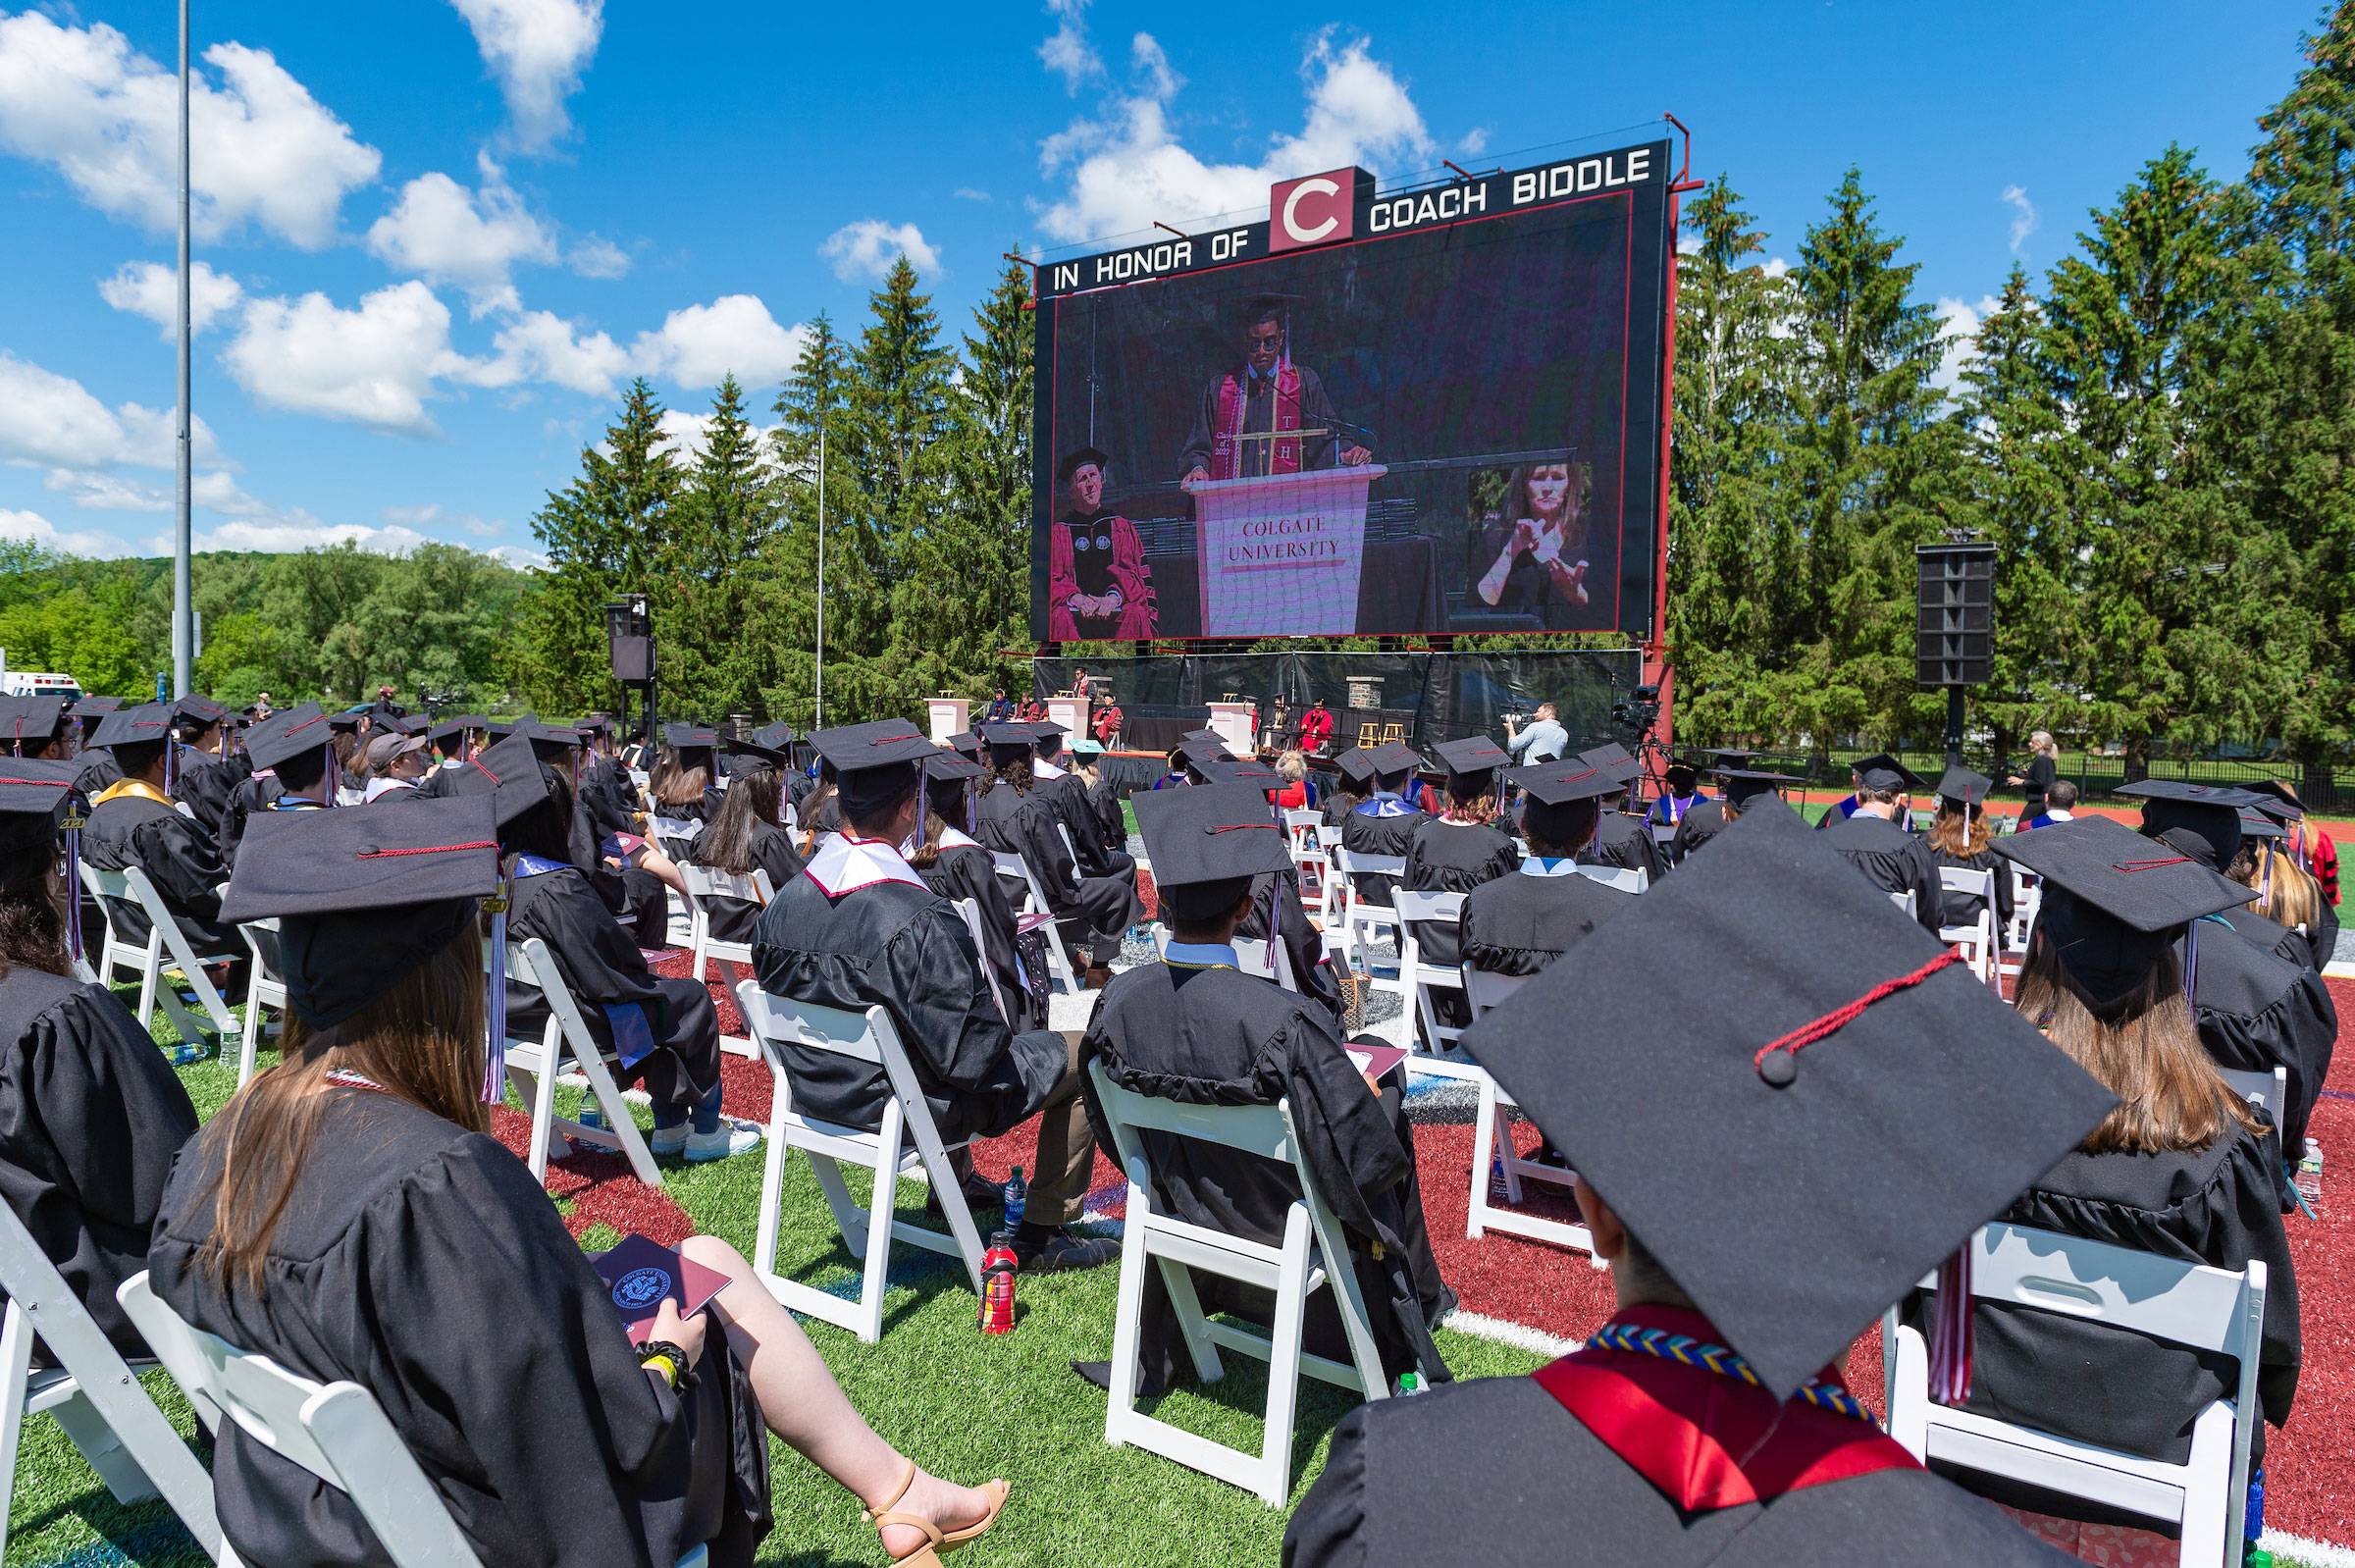 graduates in caps and gowns sitting in white folding chairs on the football field, ceremony on stadium screen in background